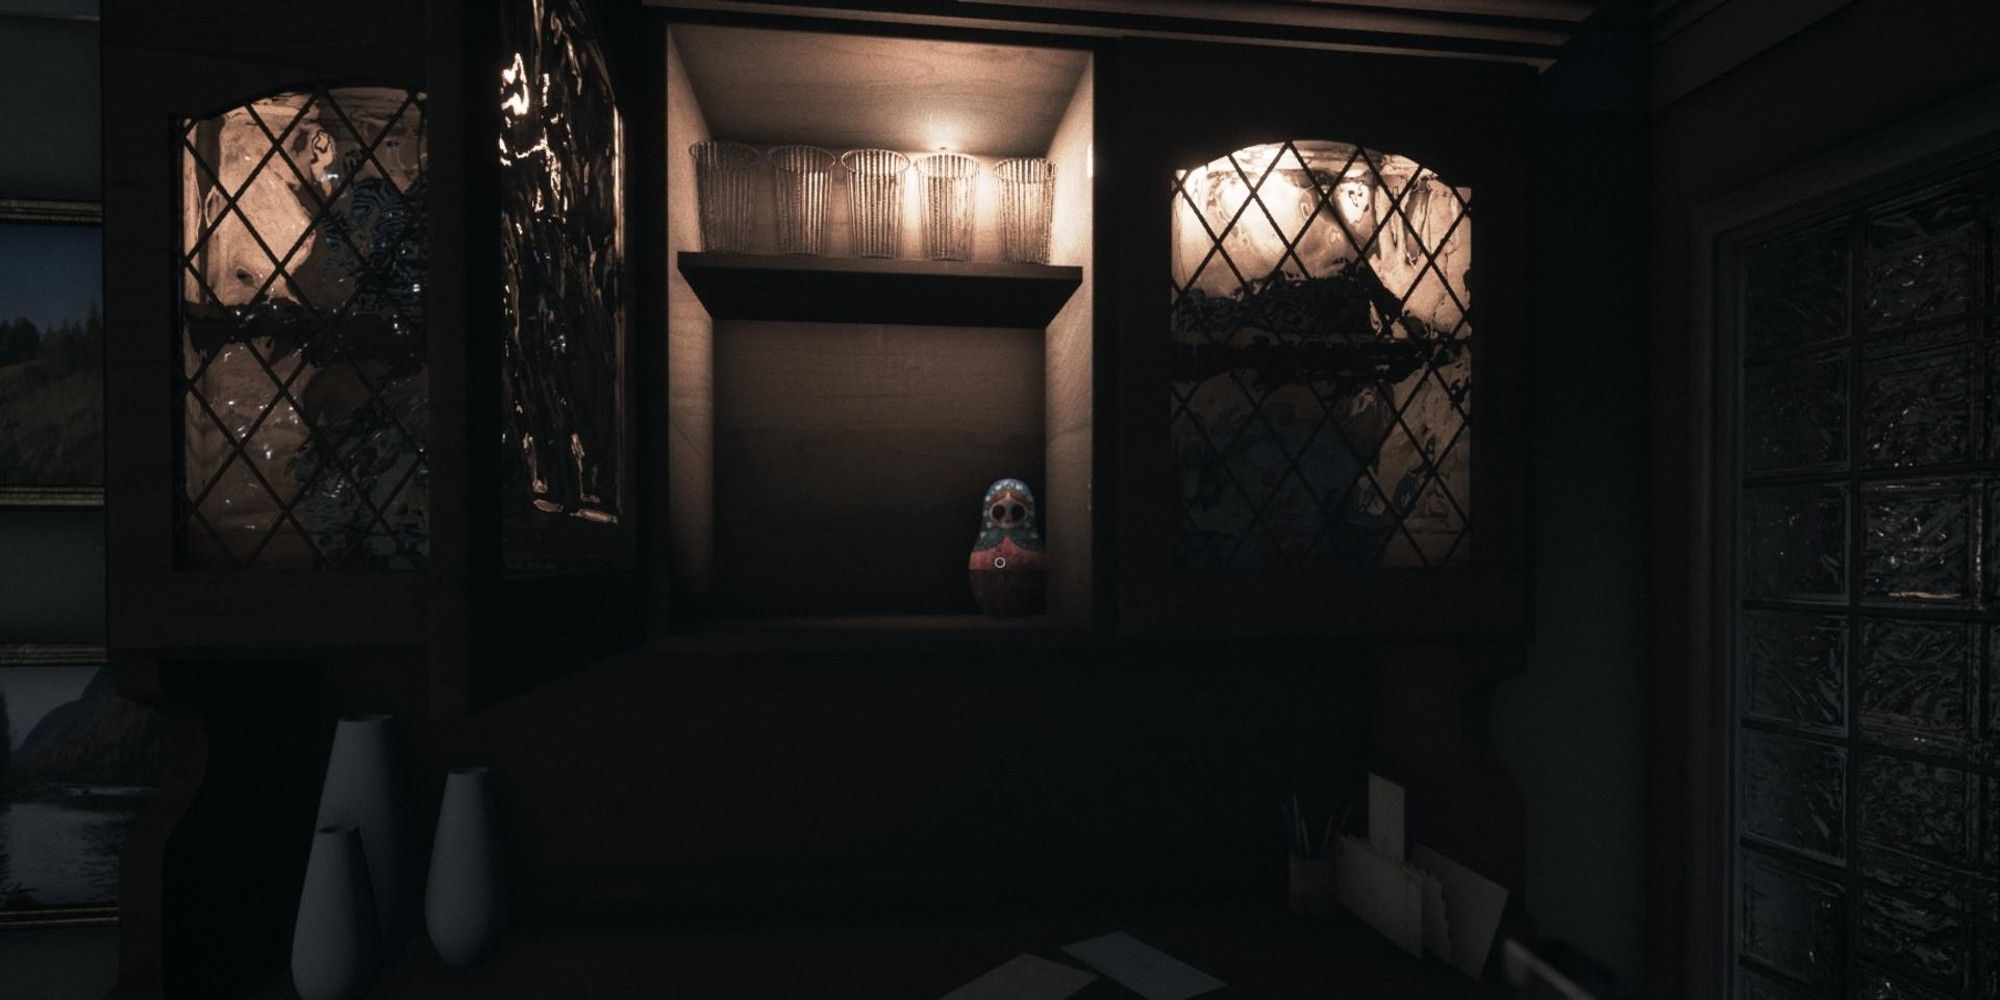 A Matryoshka doll in the dining room cabinet in Visage